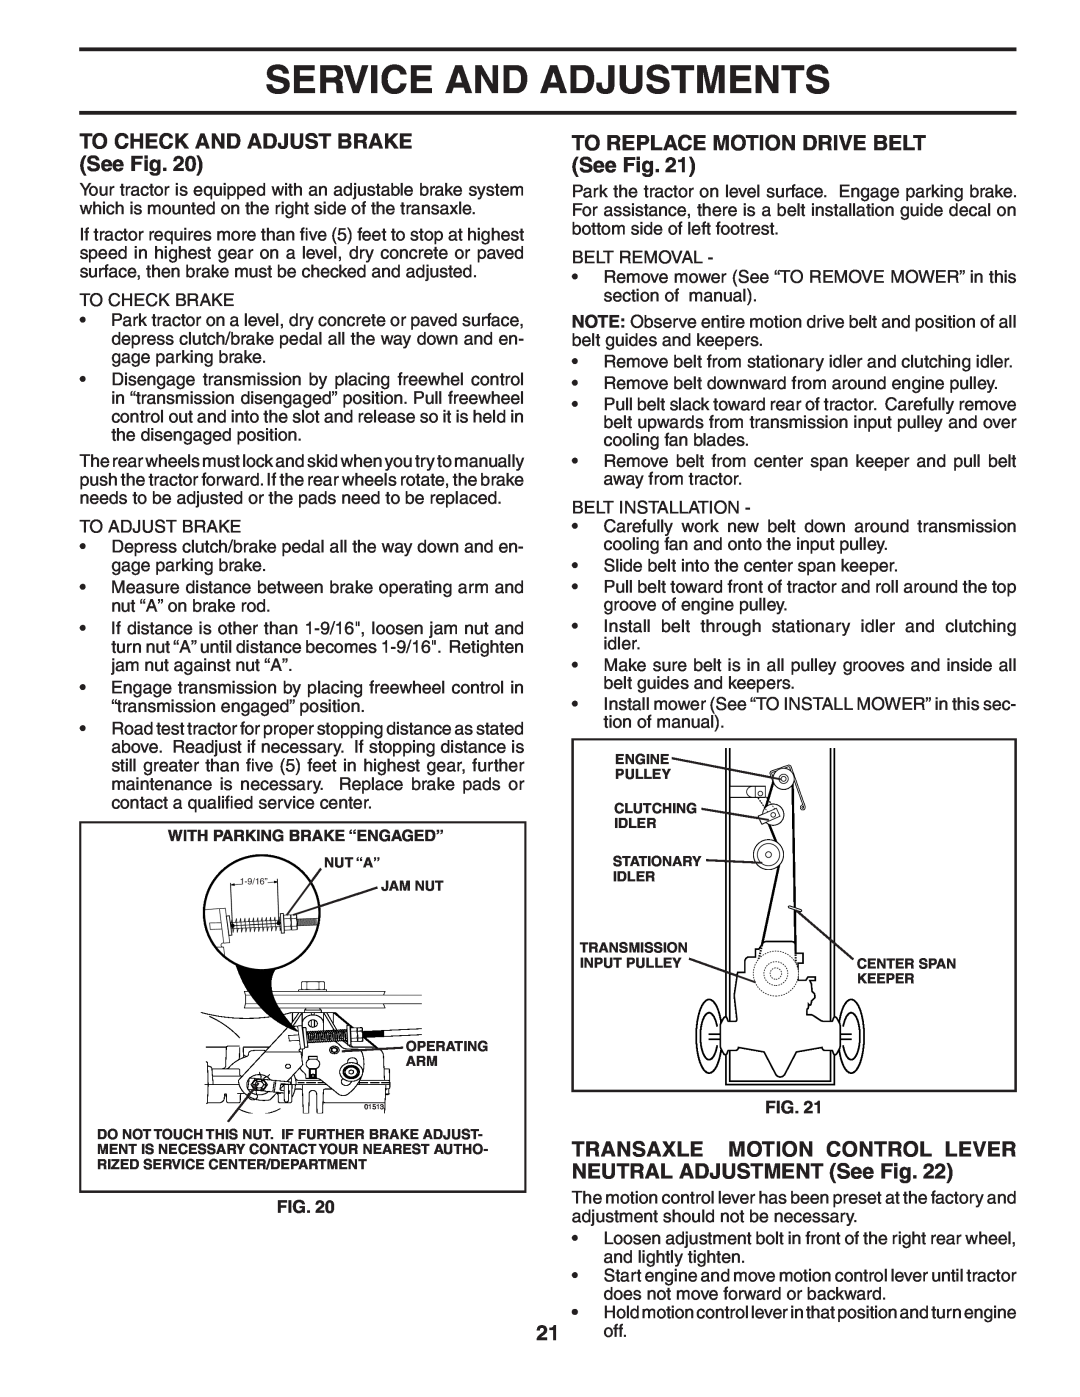 Poulan 403444 manual TO CHECK AND ADJUST BRAKE See Fig, TO REPLACE MOTION DRIVE BELT See Fig, Service And Adjustments 